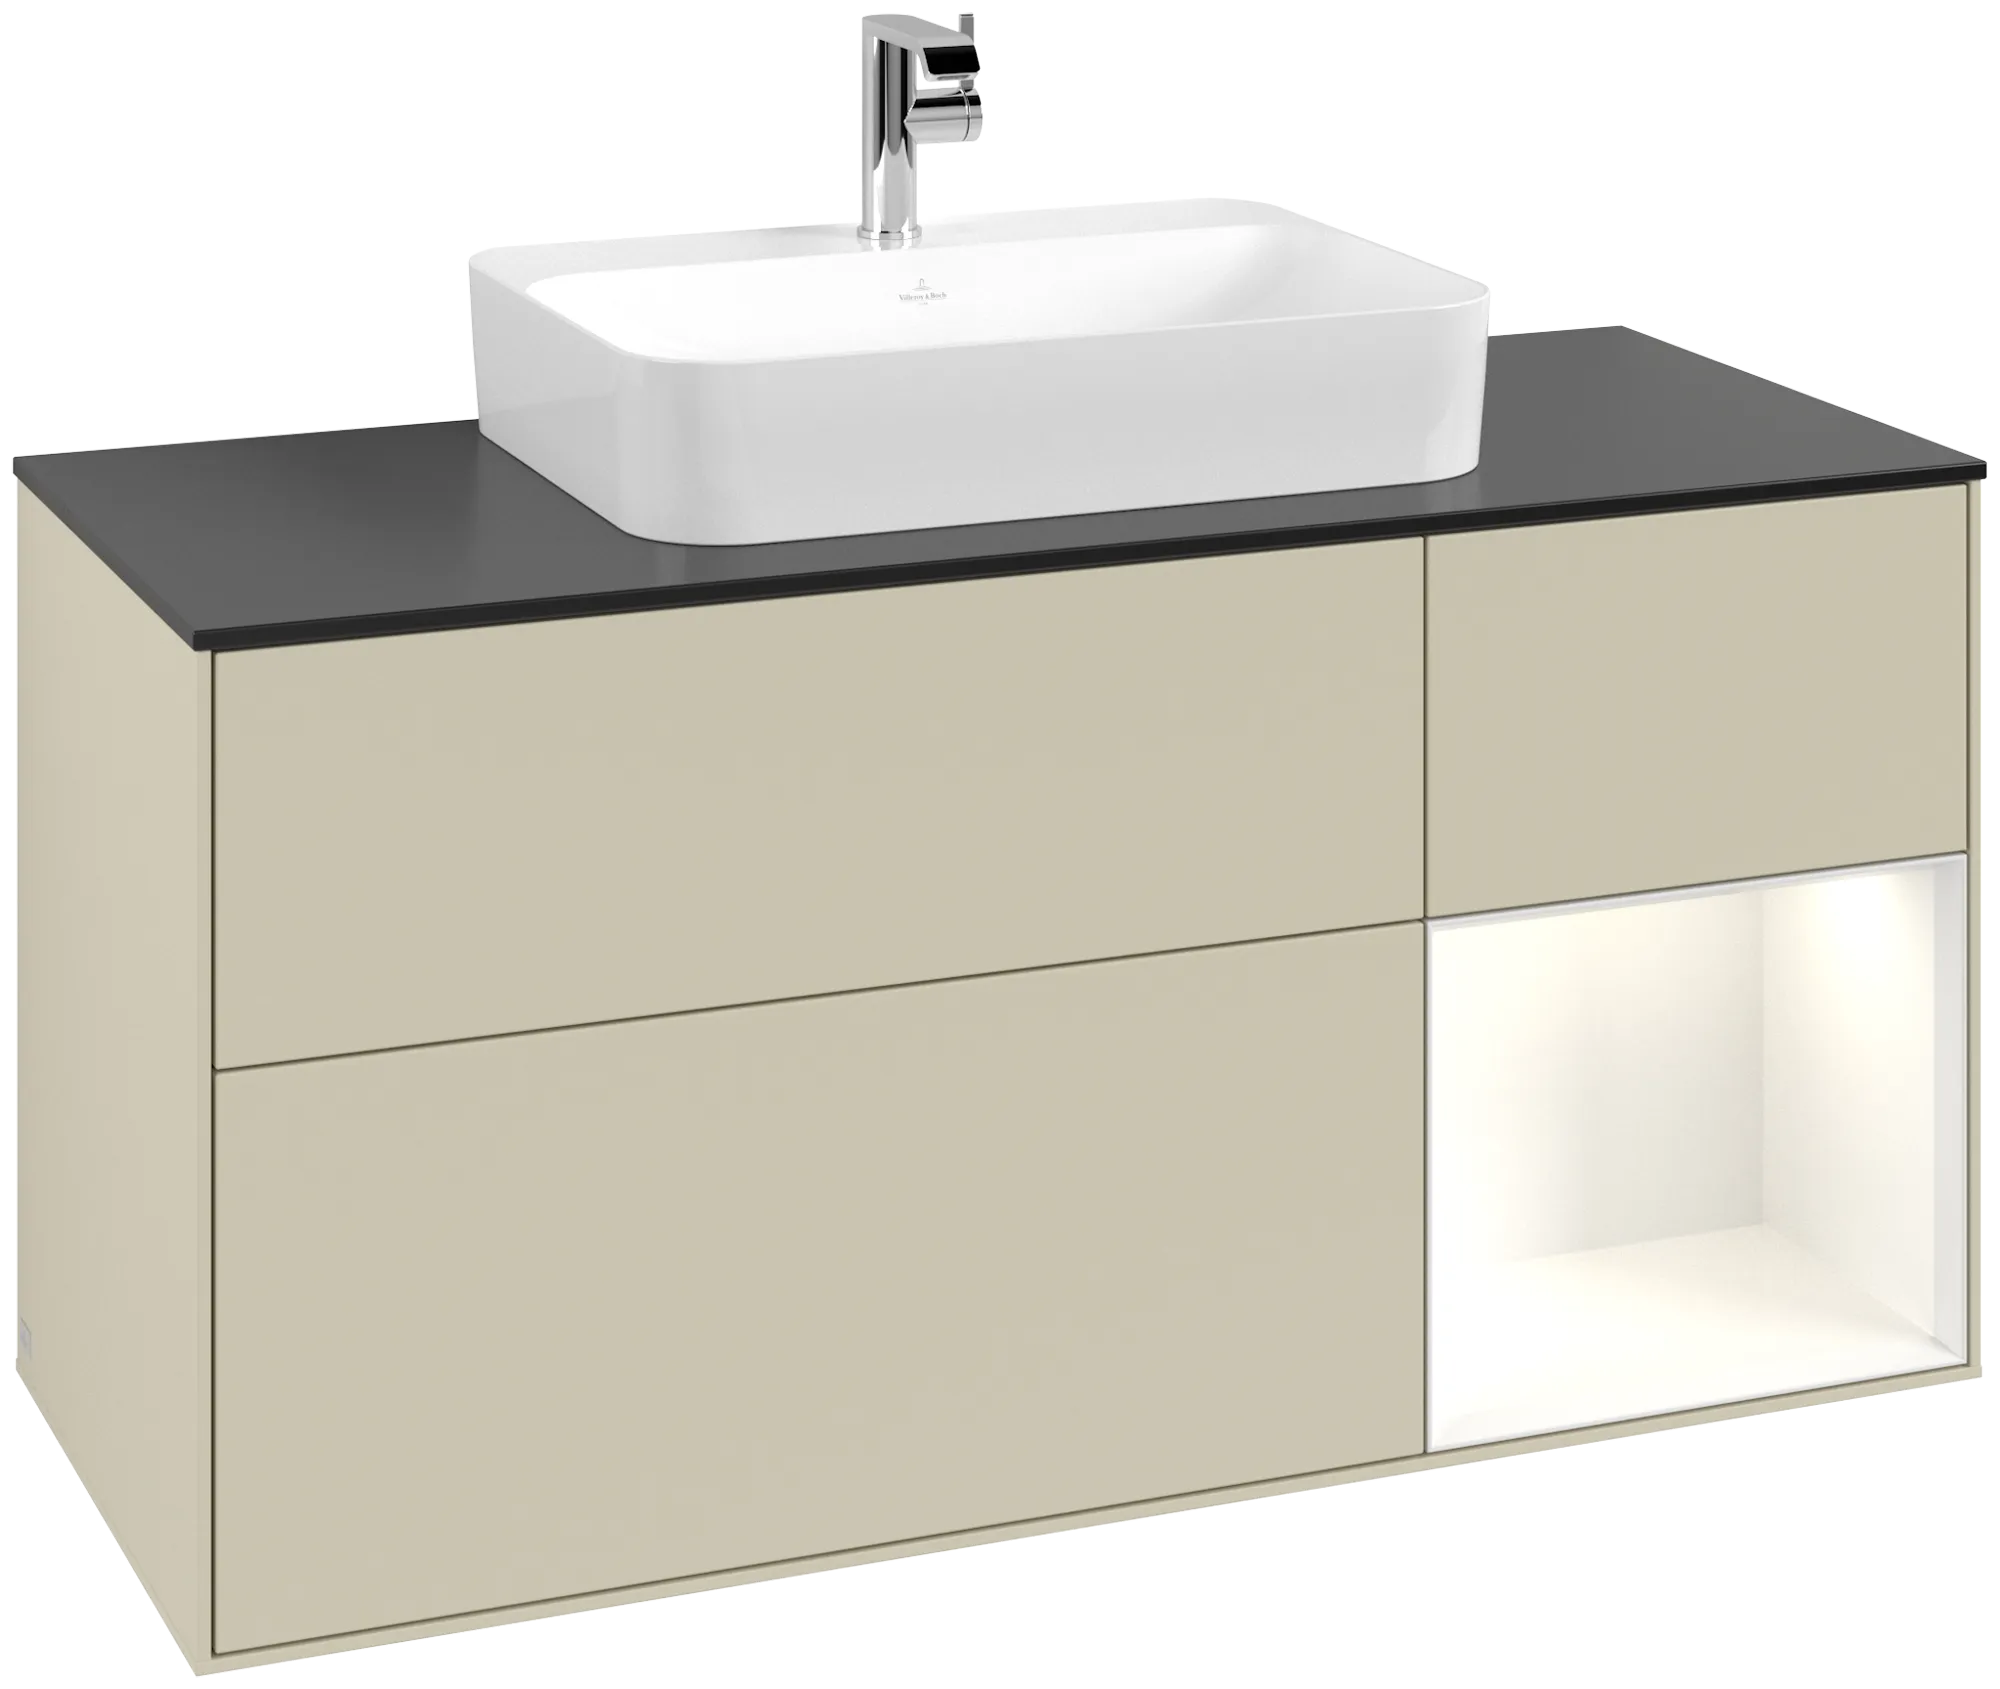 VILLEROY BOCH Finion Vanity unit, with lighting, 3 pull-out compartments, 1200 x 603 x 501 mm, Silk Grey Matt Lacquer / Glossy White Lacquer / Glass Black Matt #G422GFHJ resmi